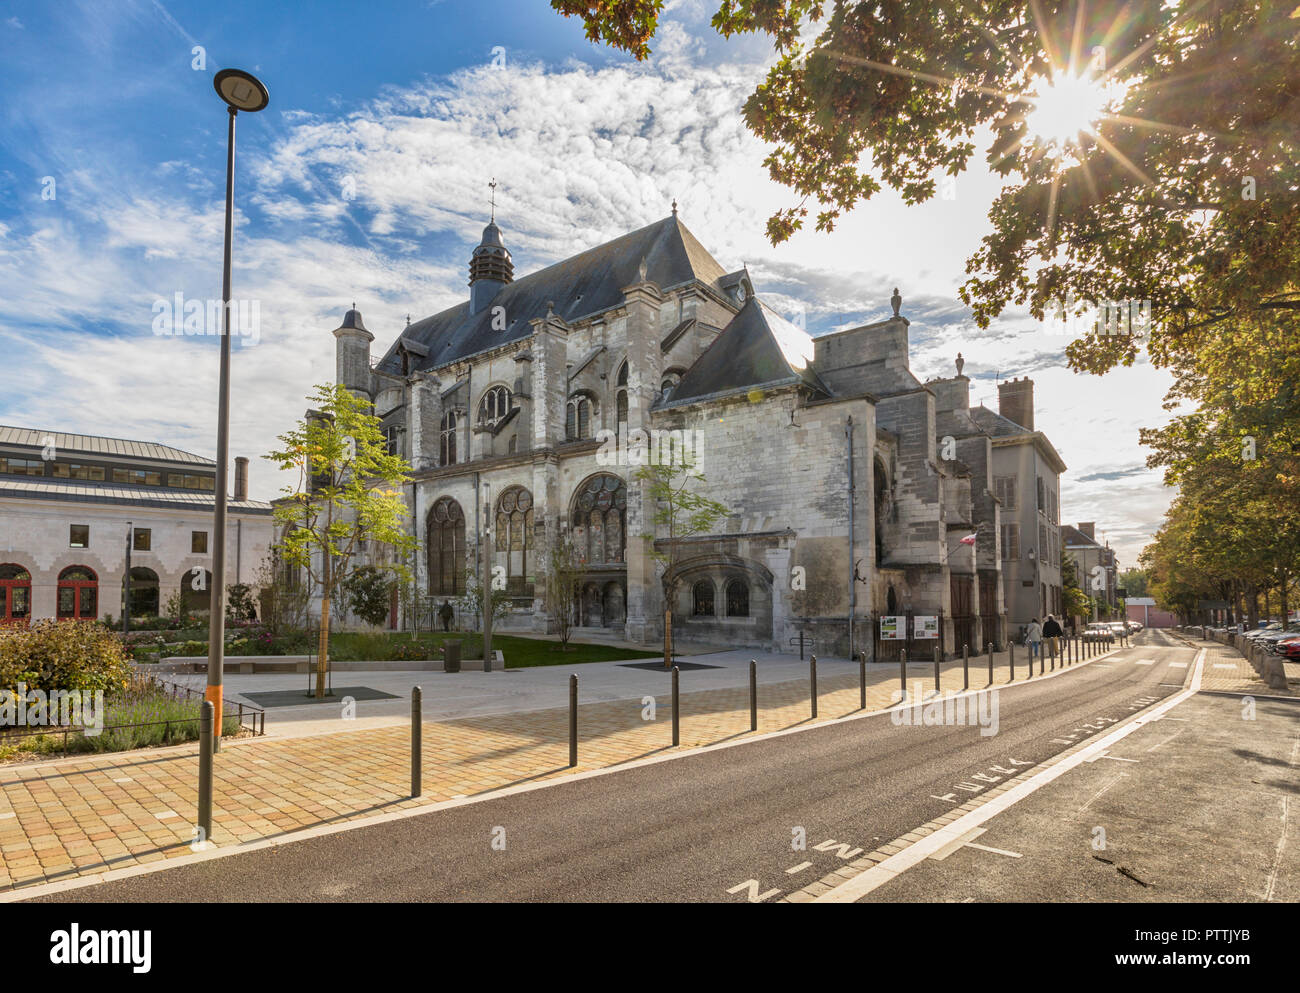 Saint Nicolas church at the old town of Troyes, France Stock Photo